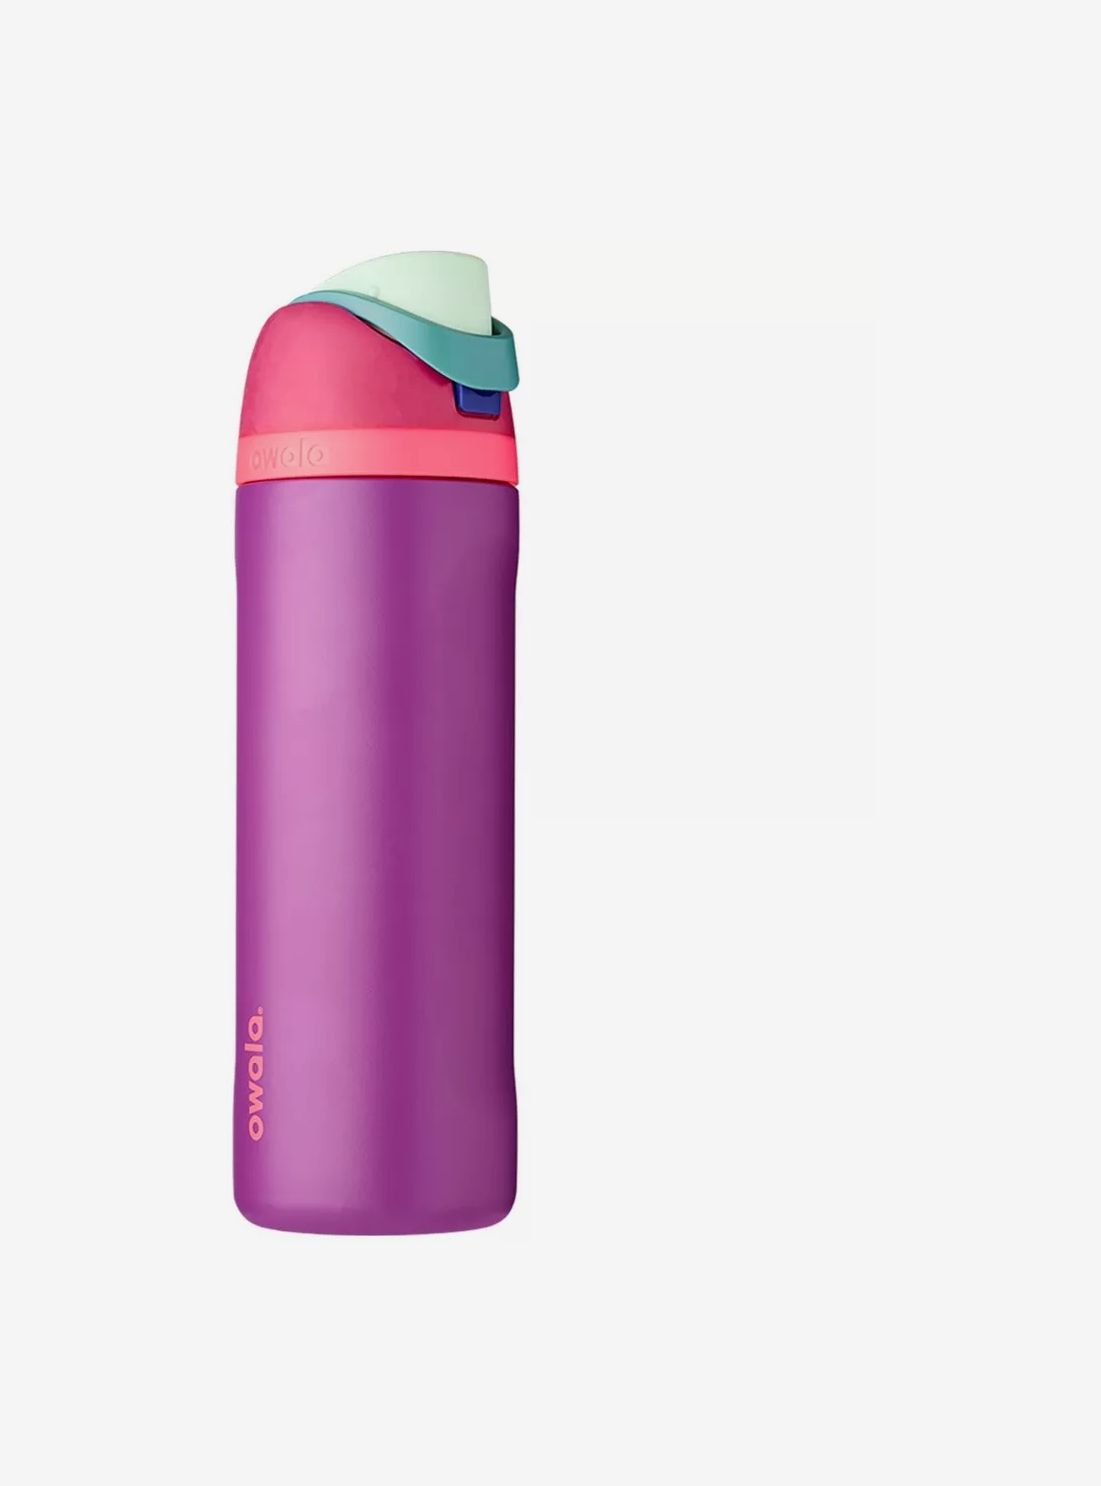 Owala water bottles are 20% off at Target